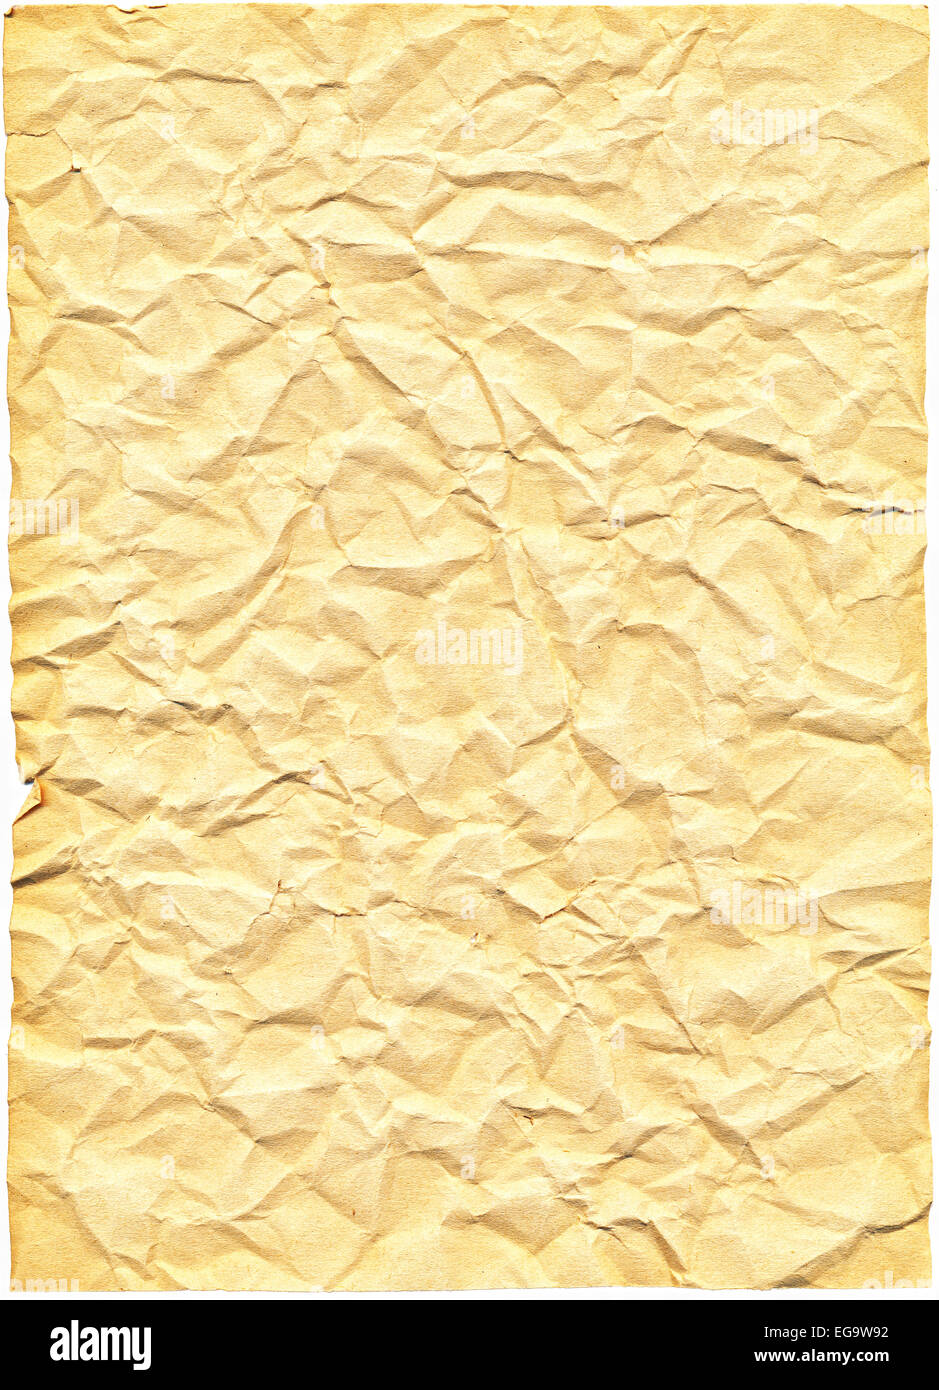 Very detailed hi res scan of a textured old crumpled paper sheet, for backgrounds, textures and layers. Stock Photo